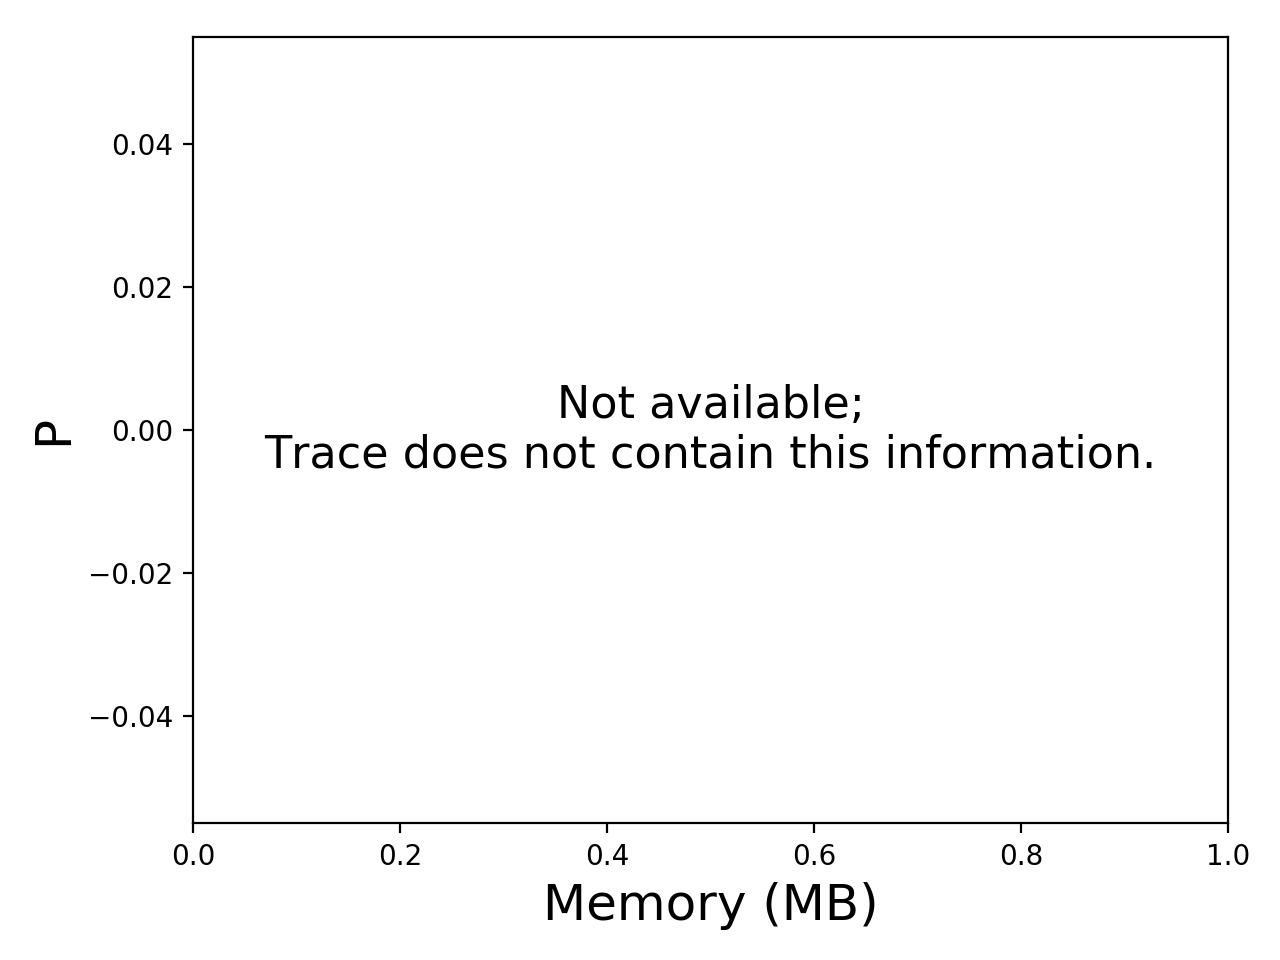 Task memory consumption graph for the Pegasus_P1 trace.